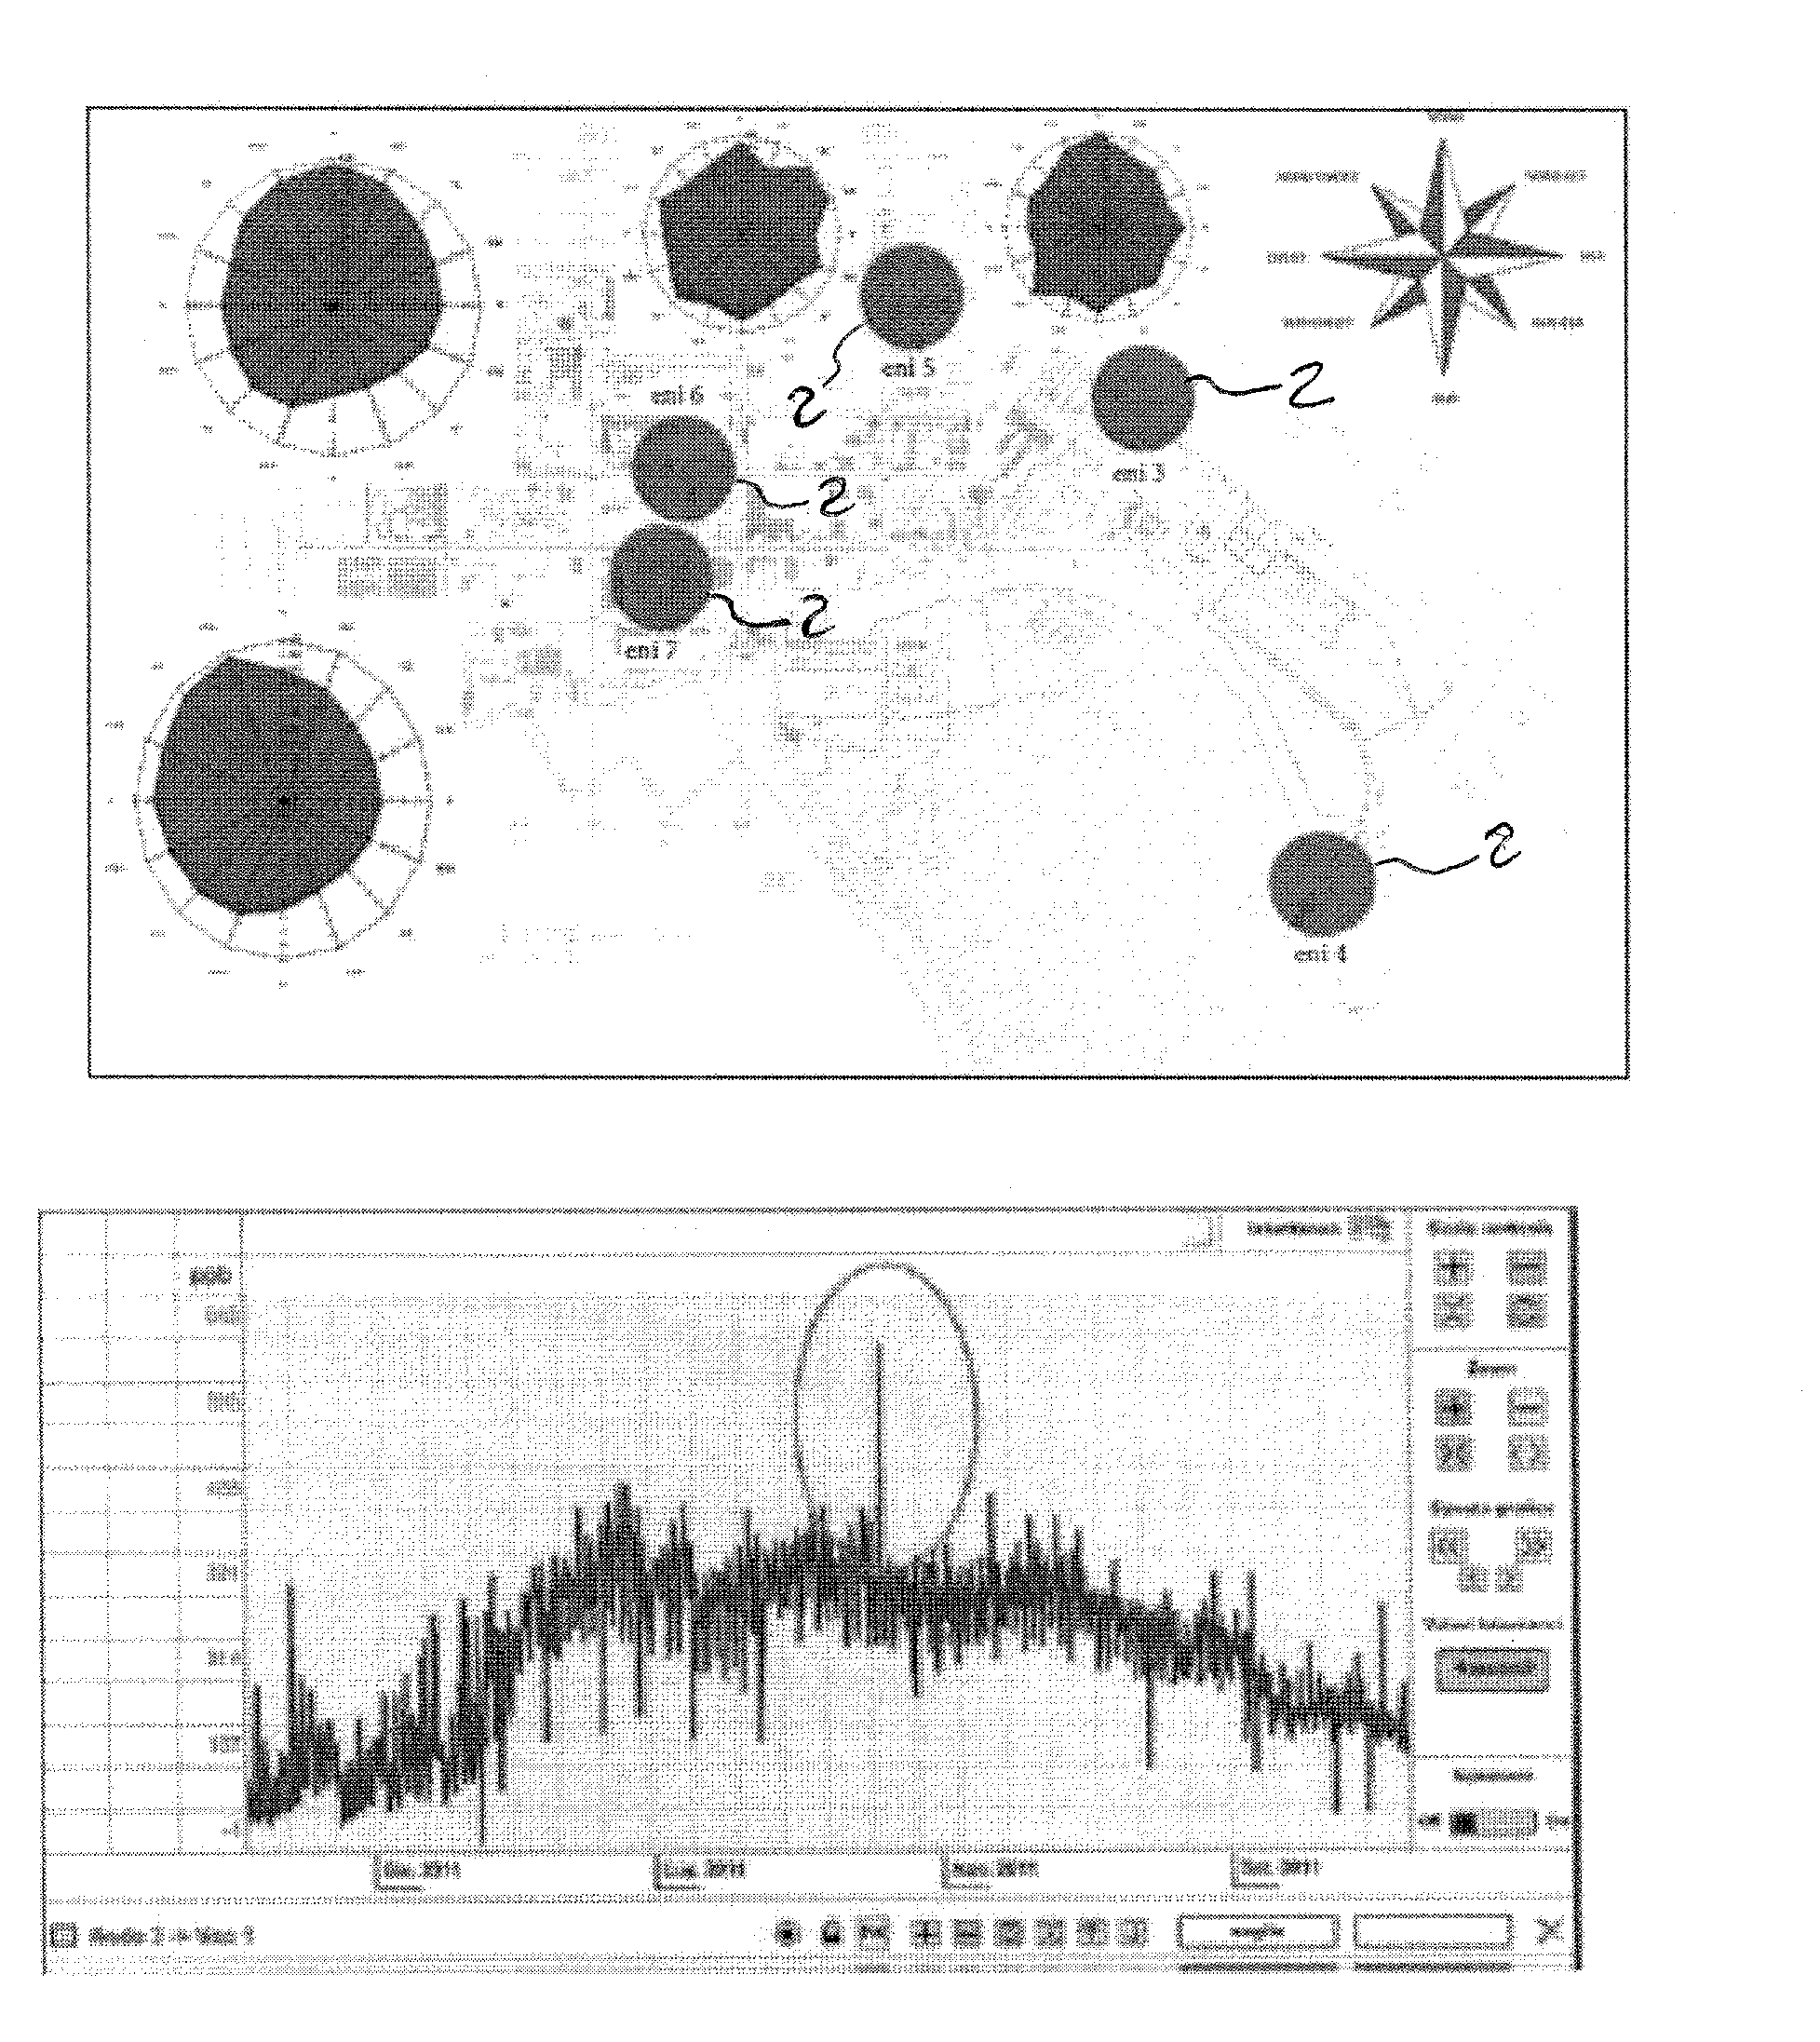 Systems and Methods for Detecting Gases, Airborne Compounds, and Other Particulates